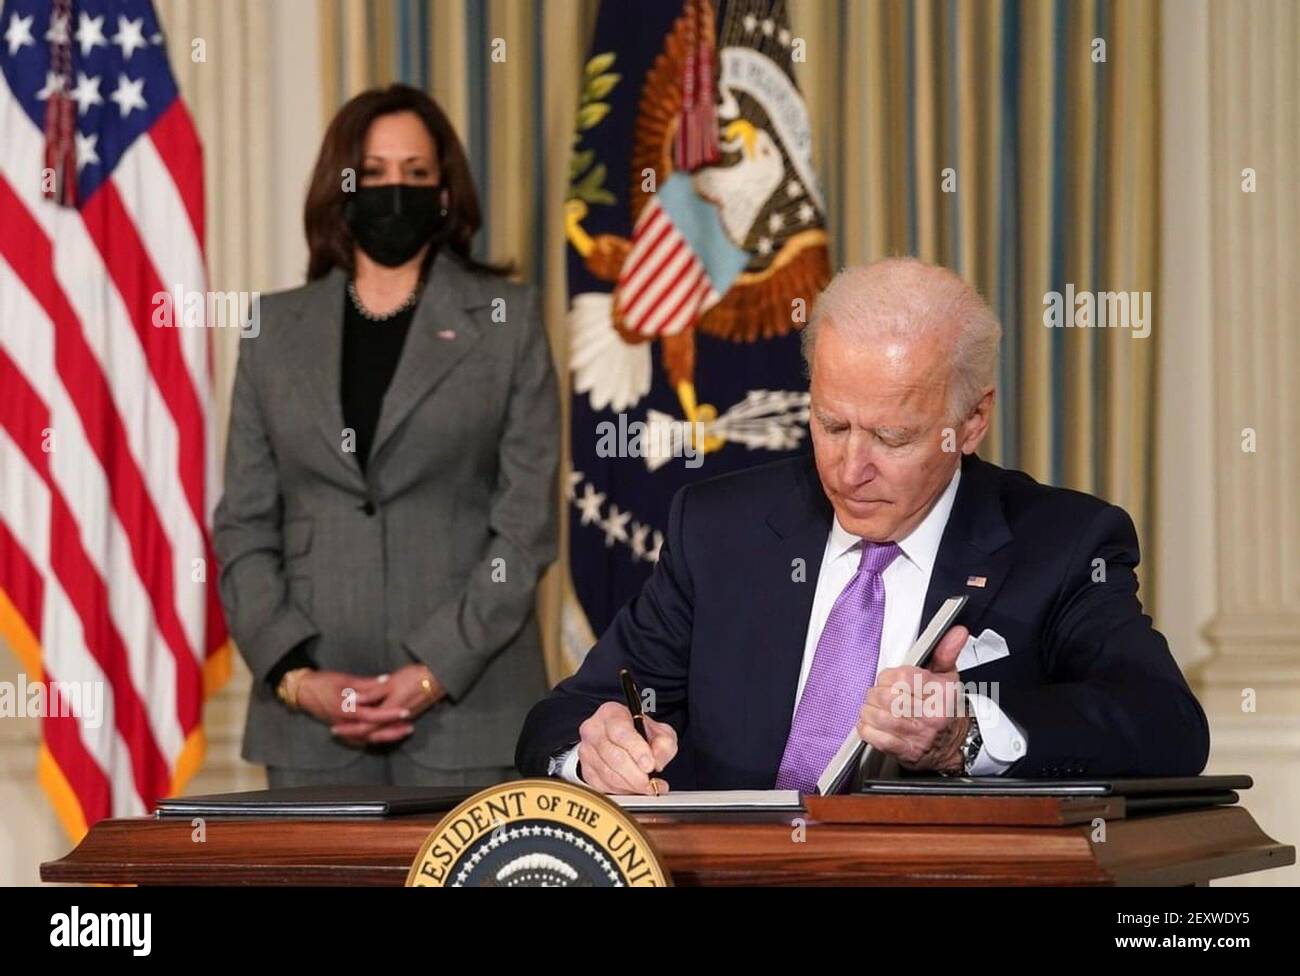 America ,10 Jan 2021:In this Picture American prim minister Joe Biden has shown while signing some papers( Selective focus) Stock Photo